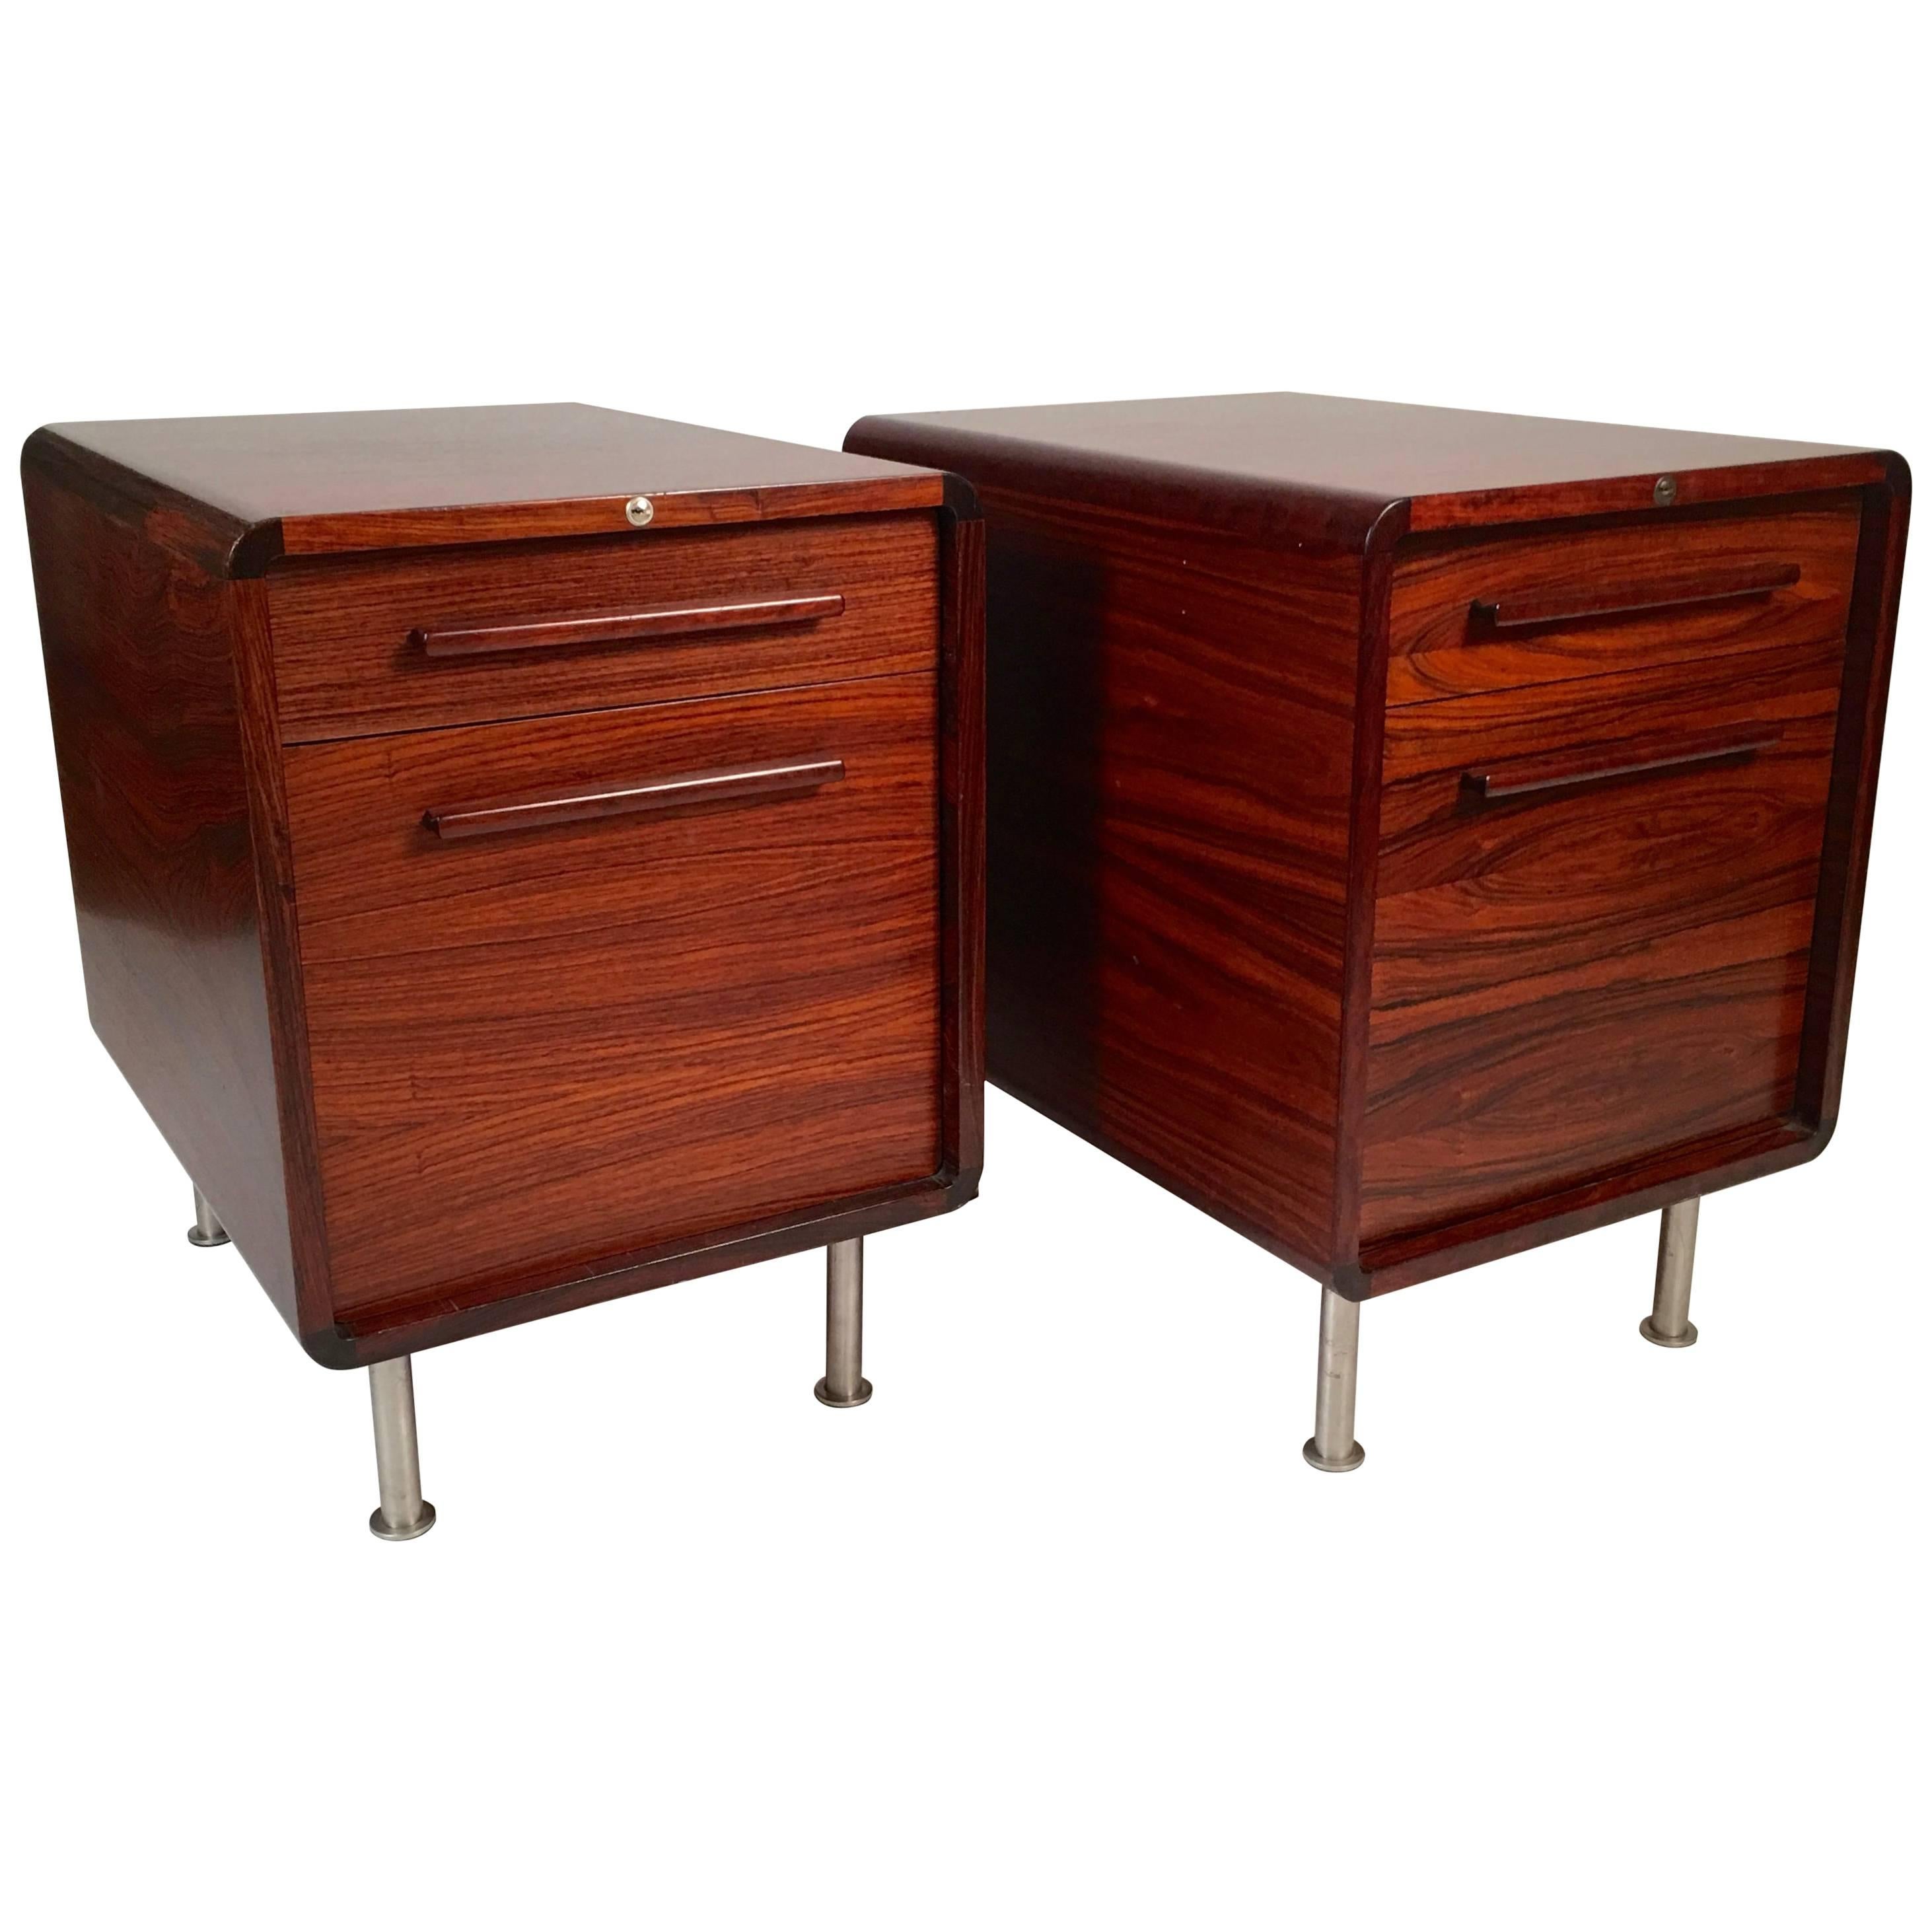 Pair of Danish Rosewood Cabinets or Nightstands